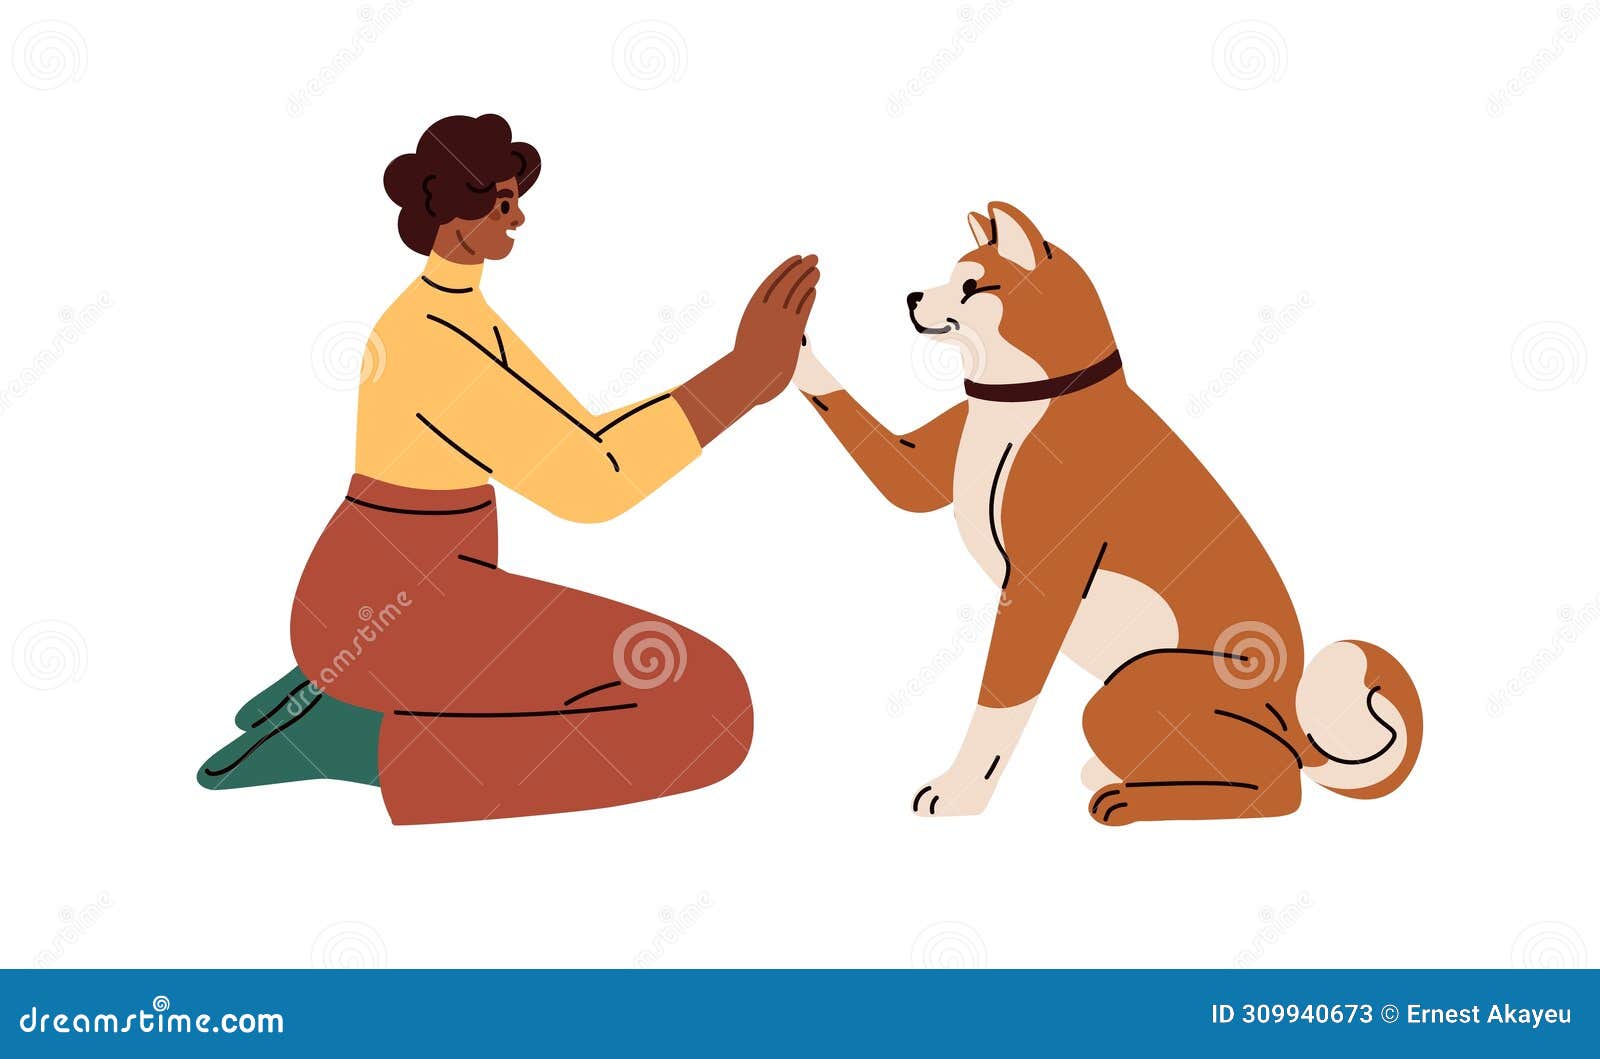 dog owner training cute smart doggy to give high five, paw clapping hand. human and obedient pet animal communication